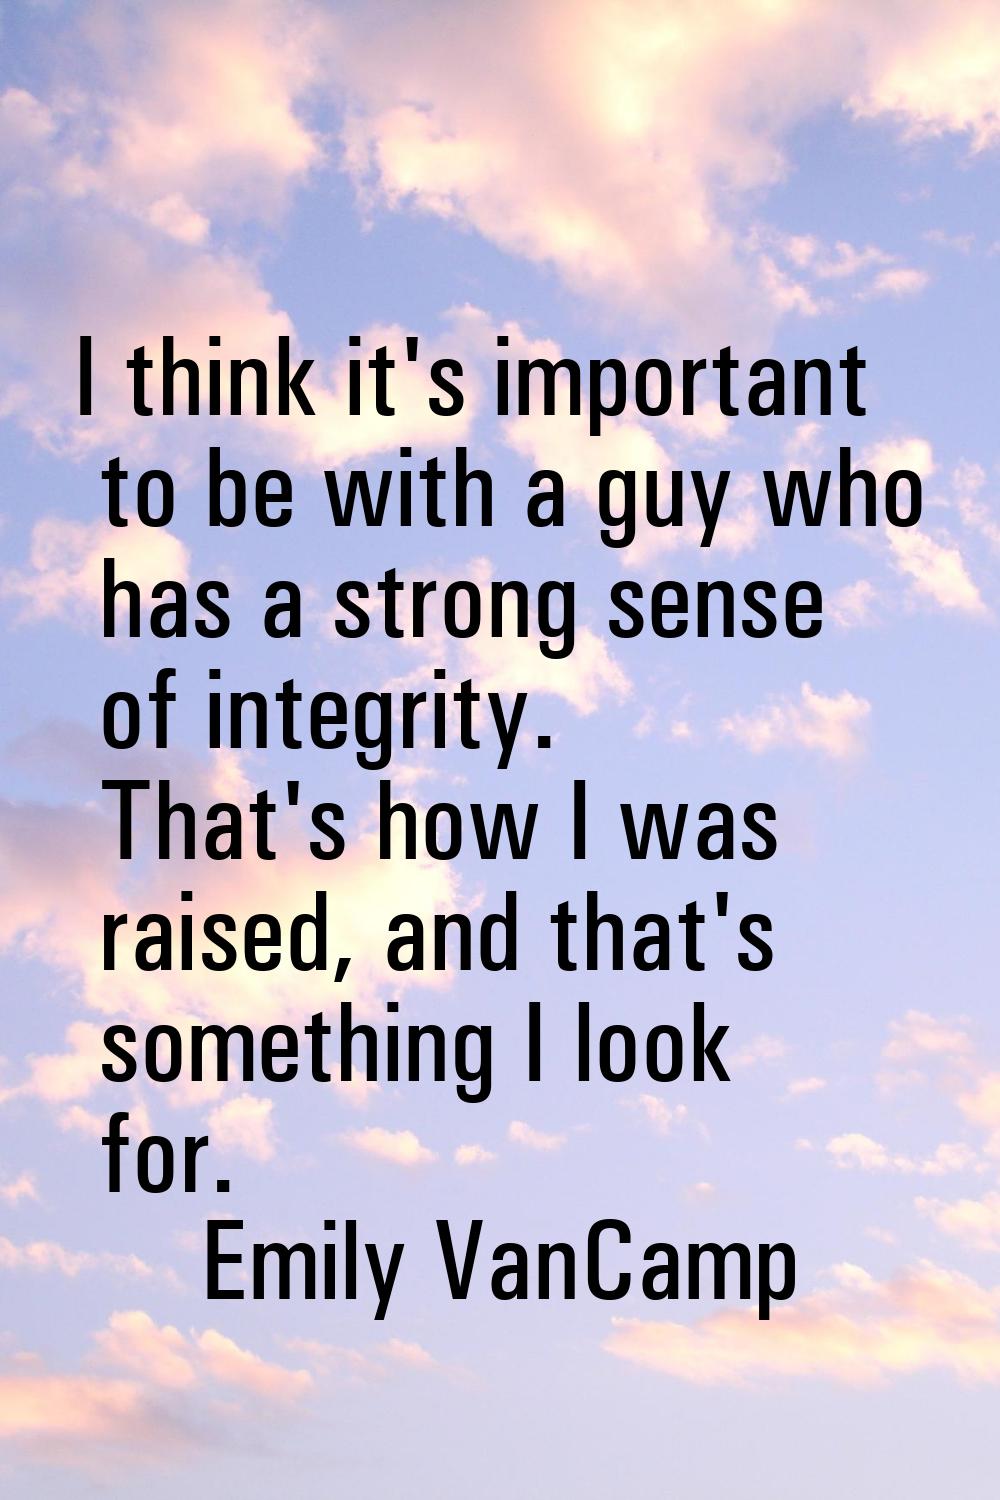 I think it's important to be with a guy who has a strong sense of integrity. That's how I was raise